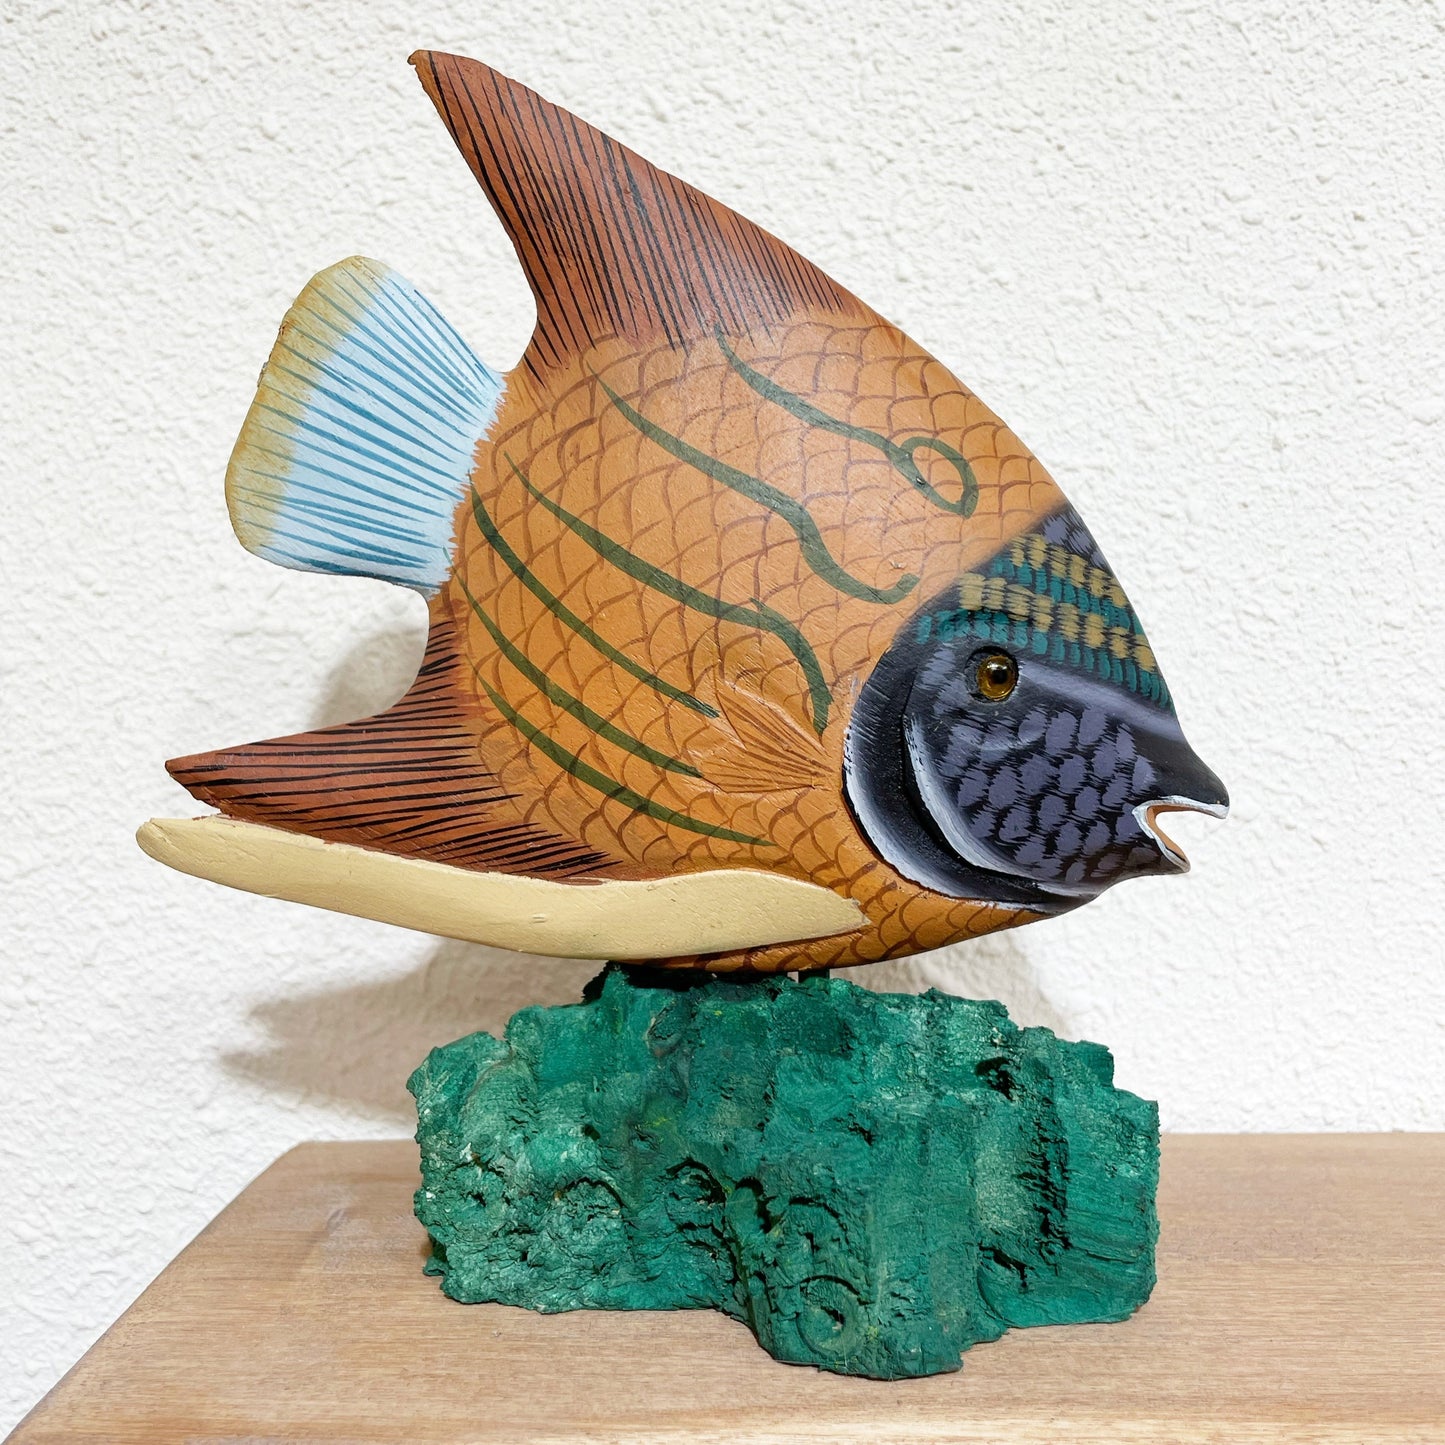 Painted Wooden Coral Reef Fish 彩繪木雕珊瑚魚